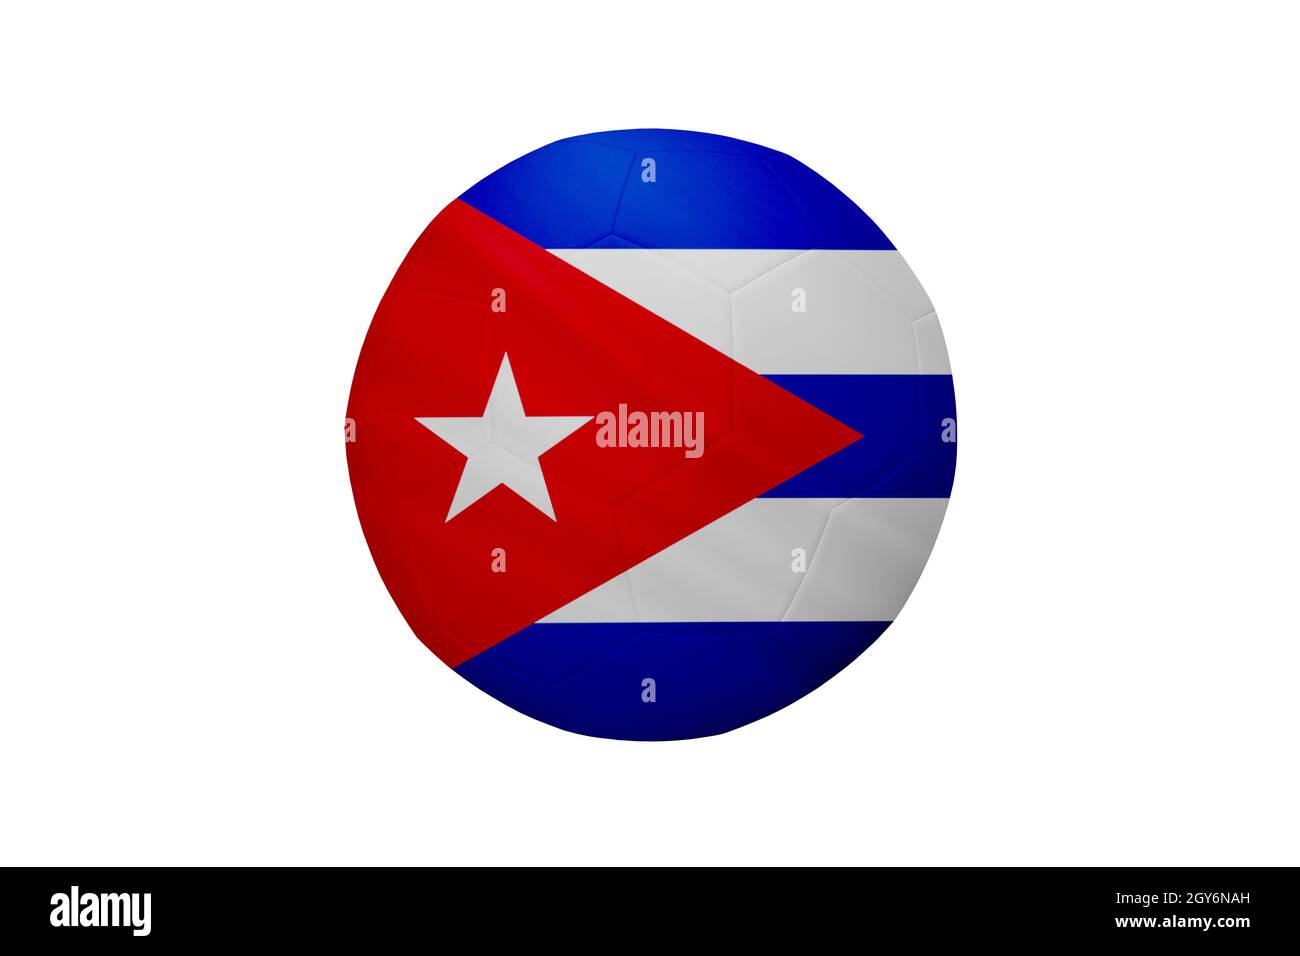 Football in the colors of the Cuba flag isolated on white background. In a conceptual championship image supporting Cuba. Stock Photo